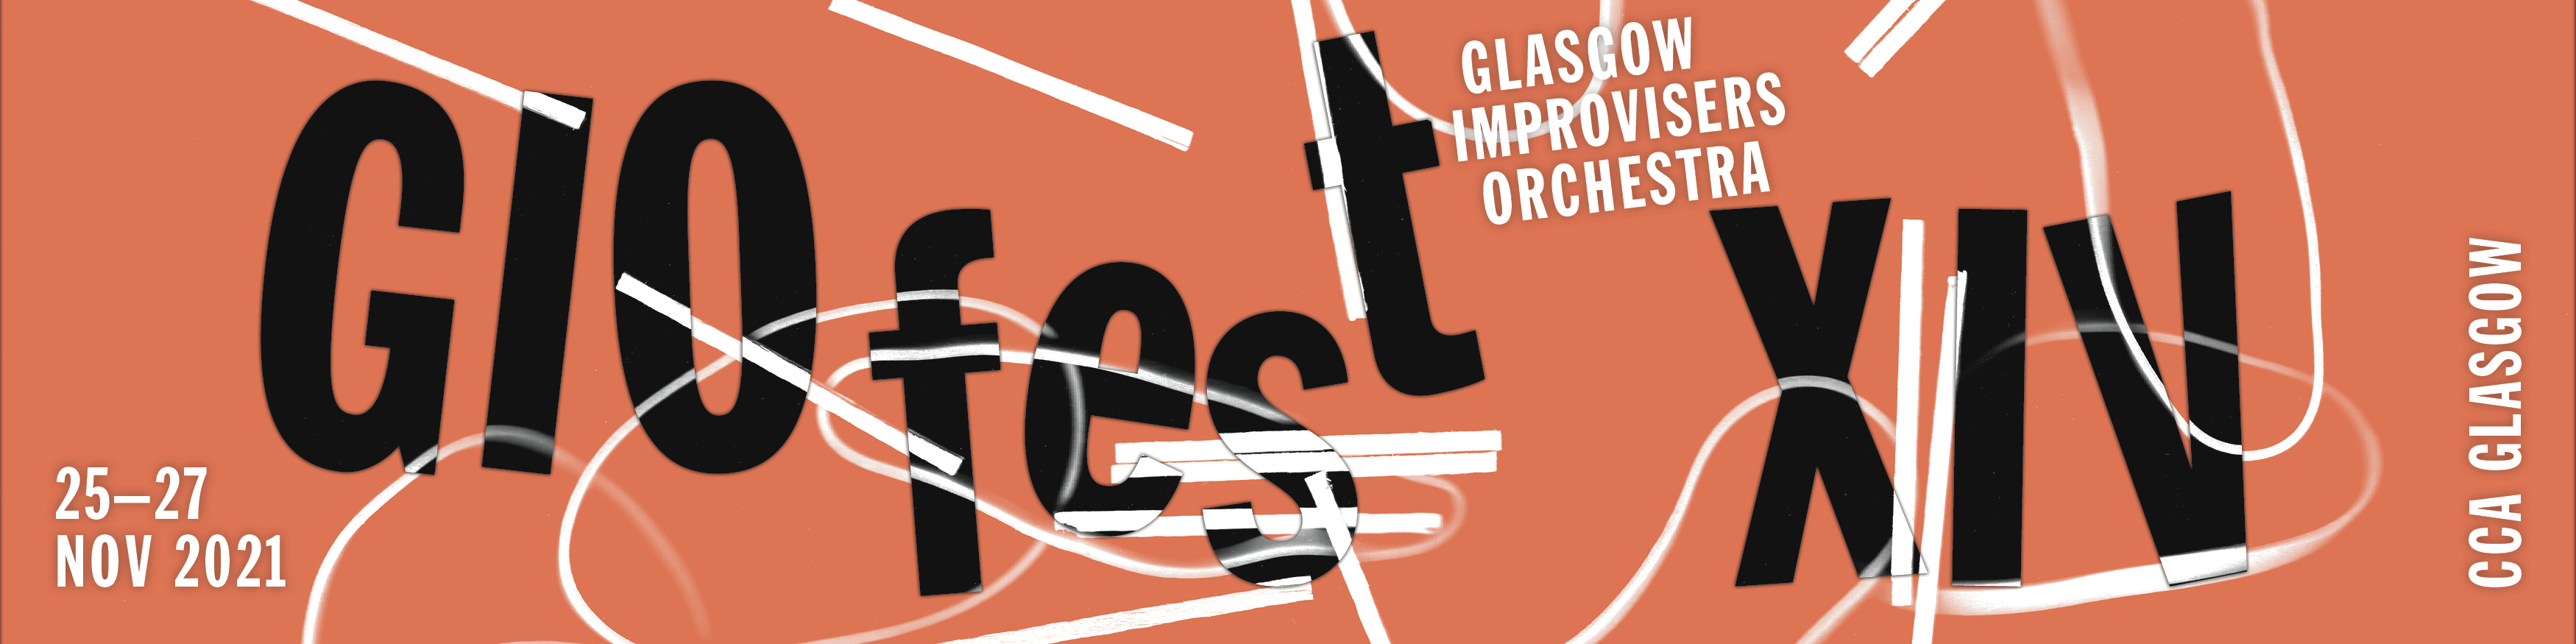 Banner for the Glasgow Improvisers Orchestra festival 2021. Bright orange background with fragmented black text.